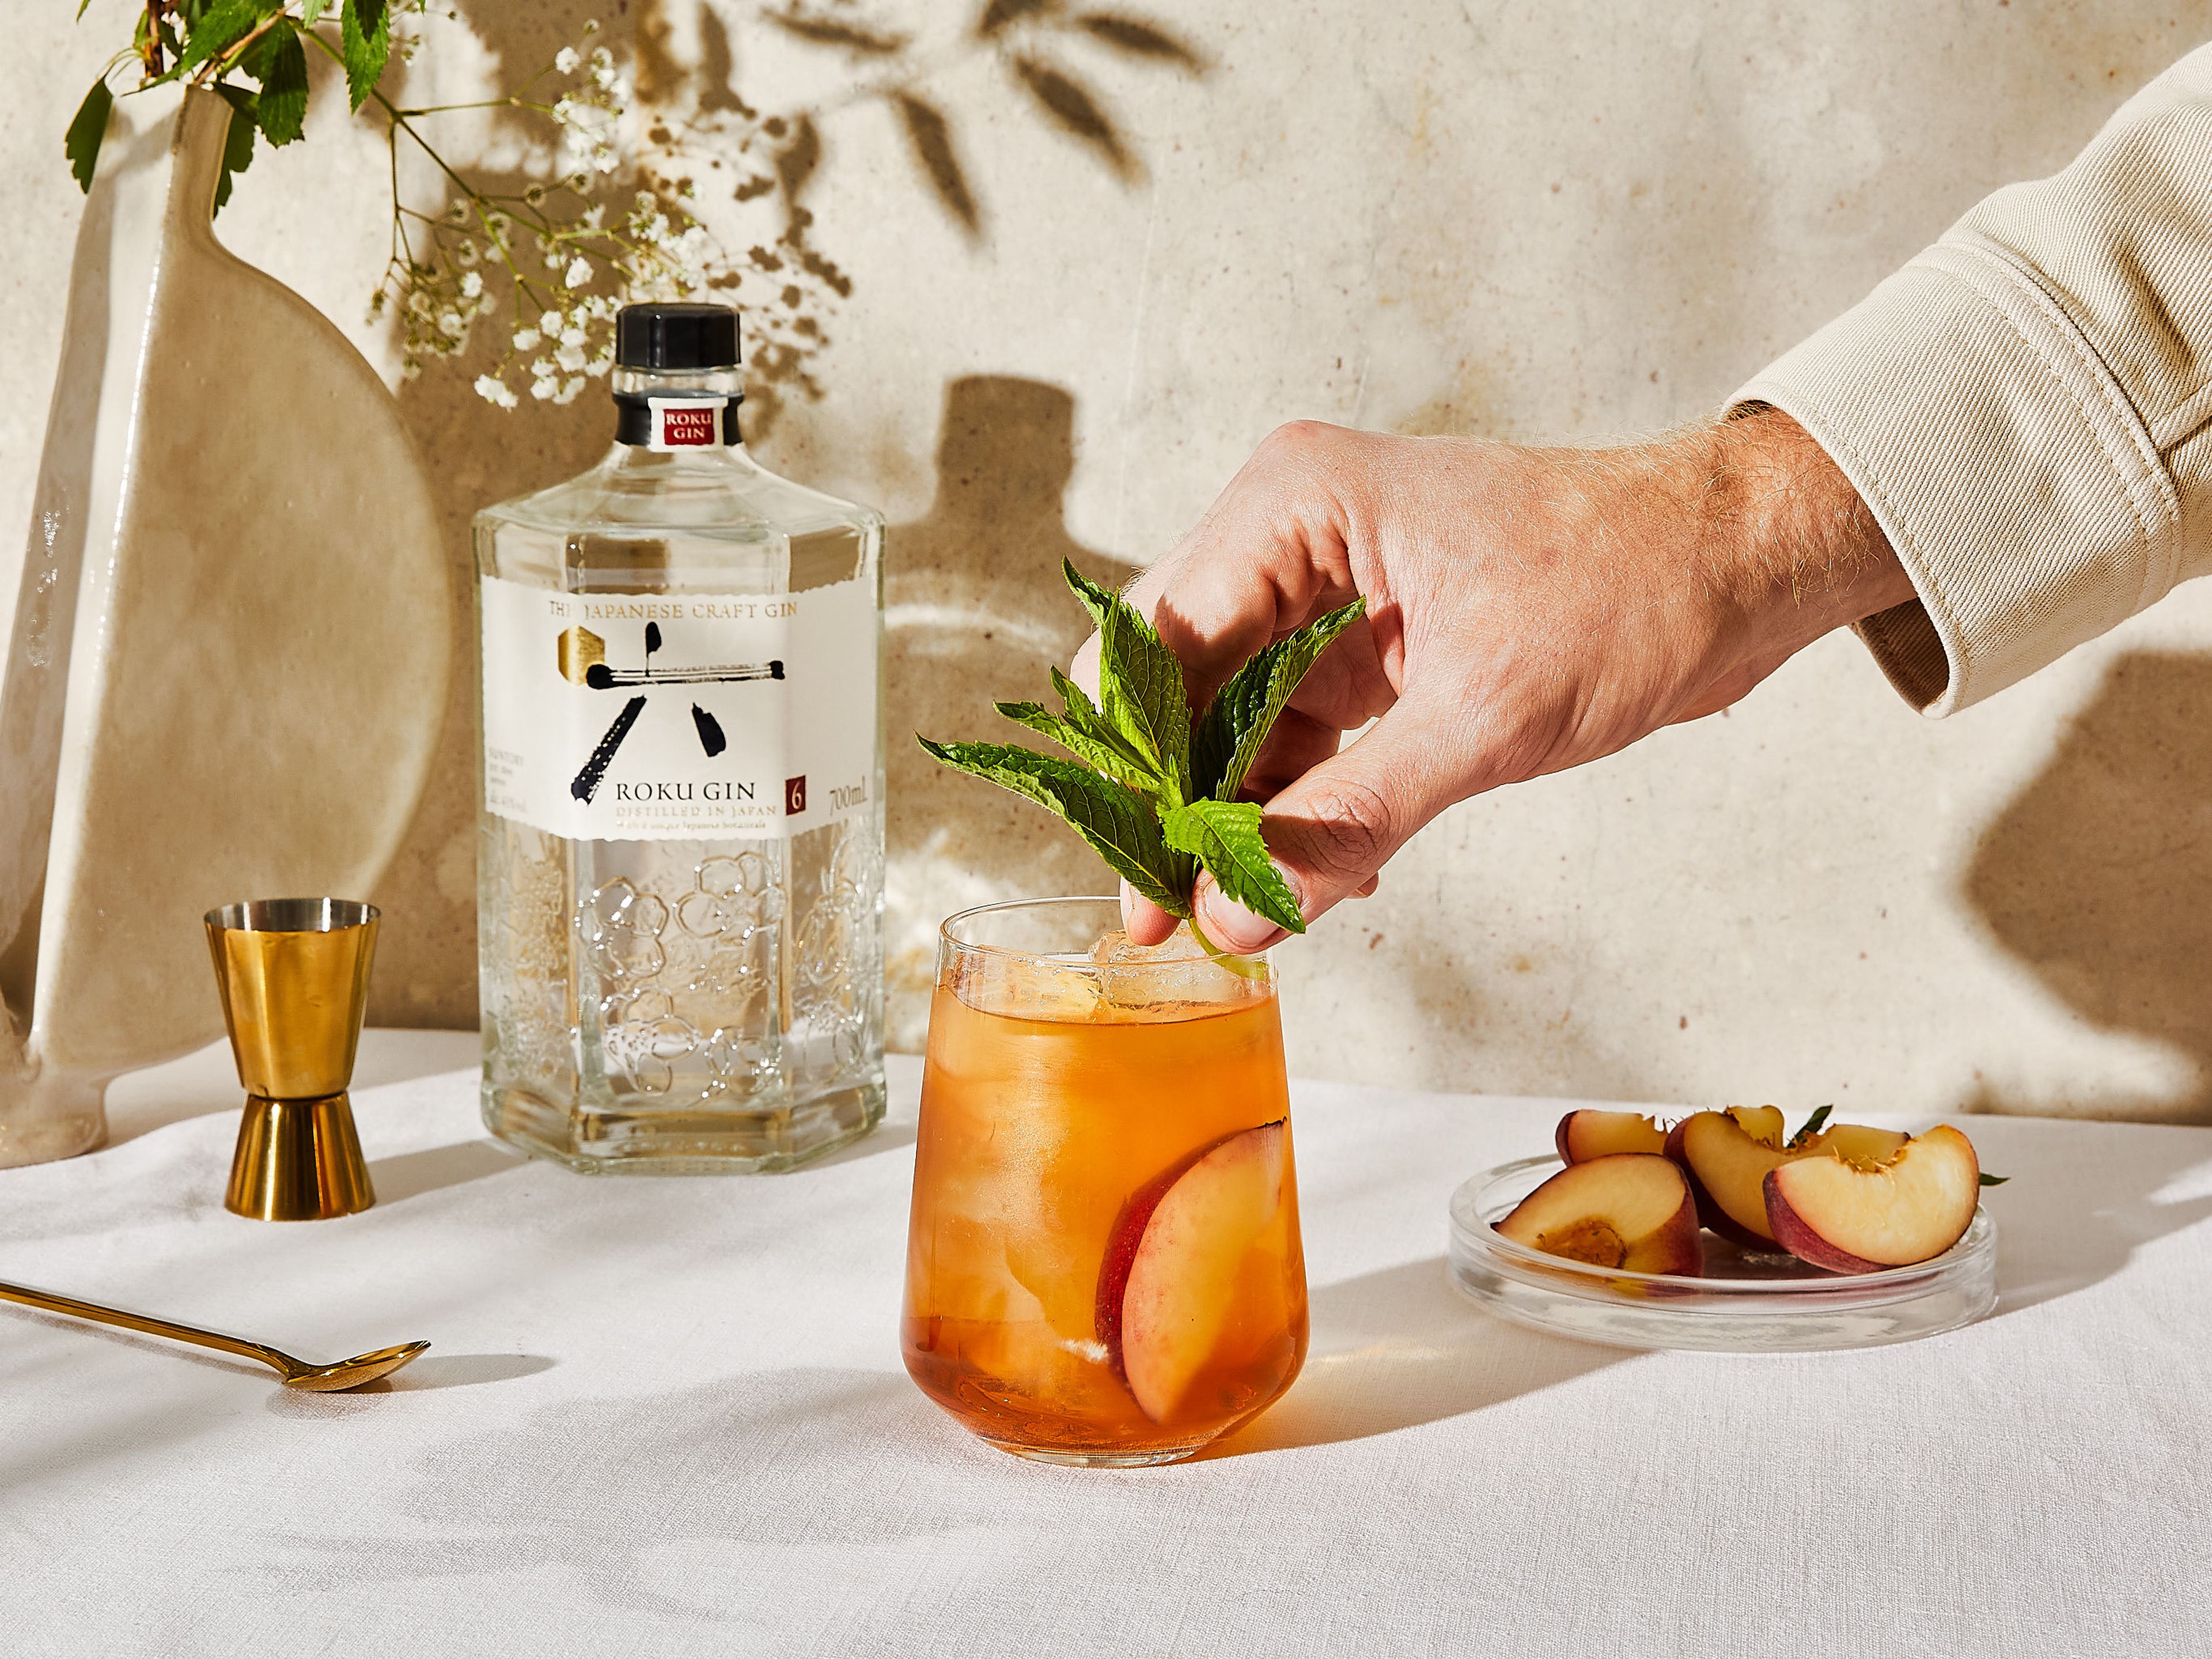 Garnish with fresh peach slices and mint to serve.